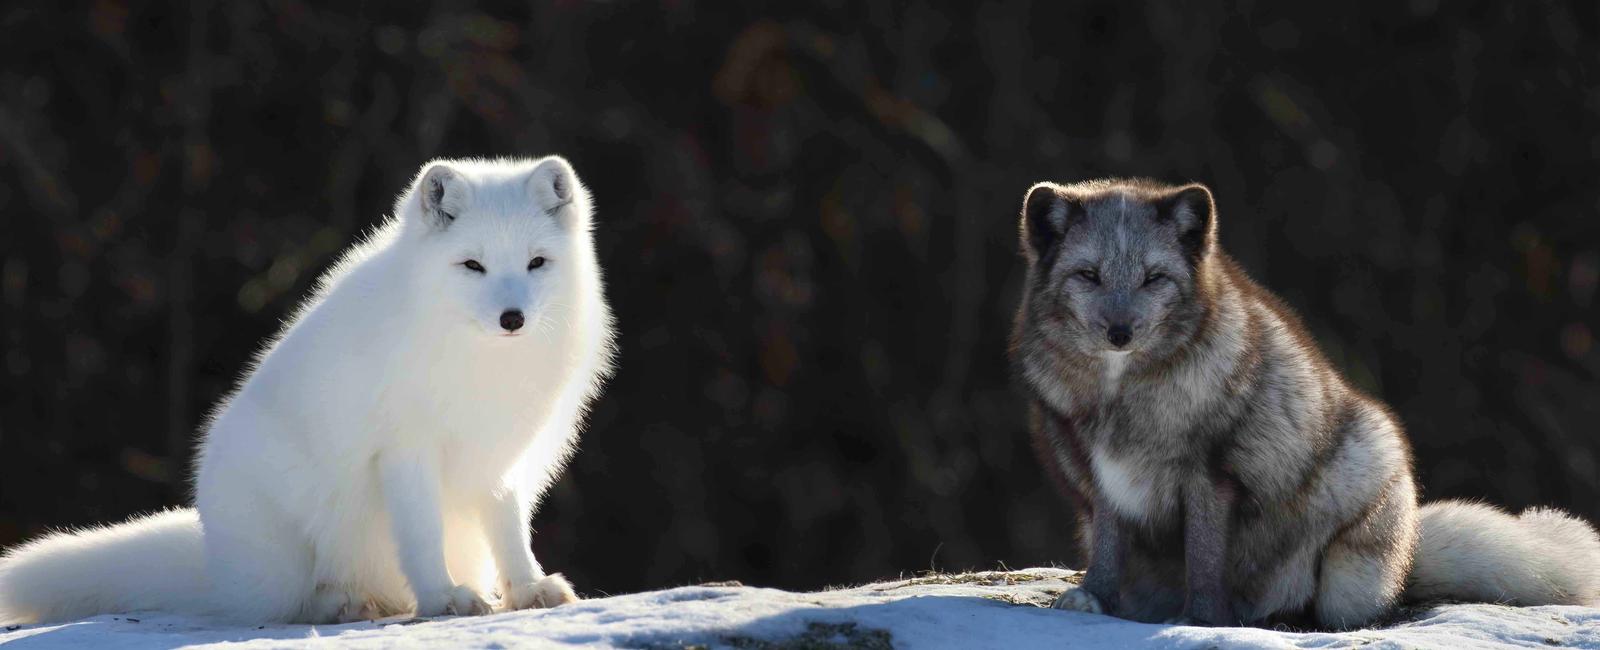 Both mother and father arctic fox stay together to raise their babies